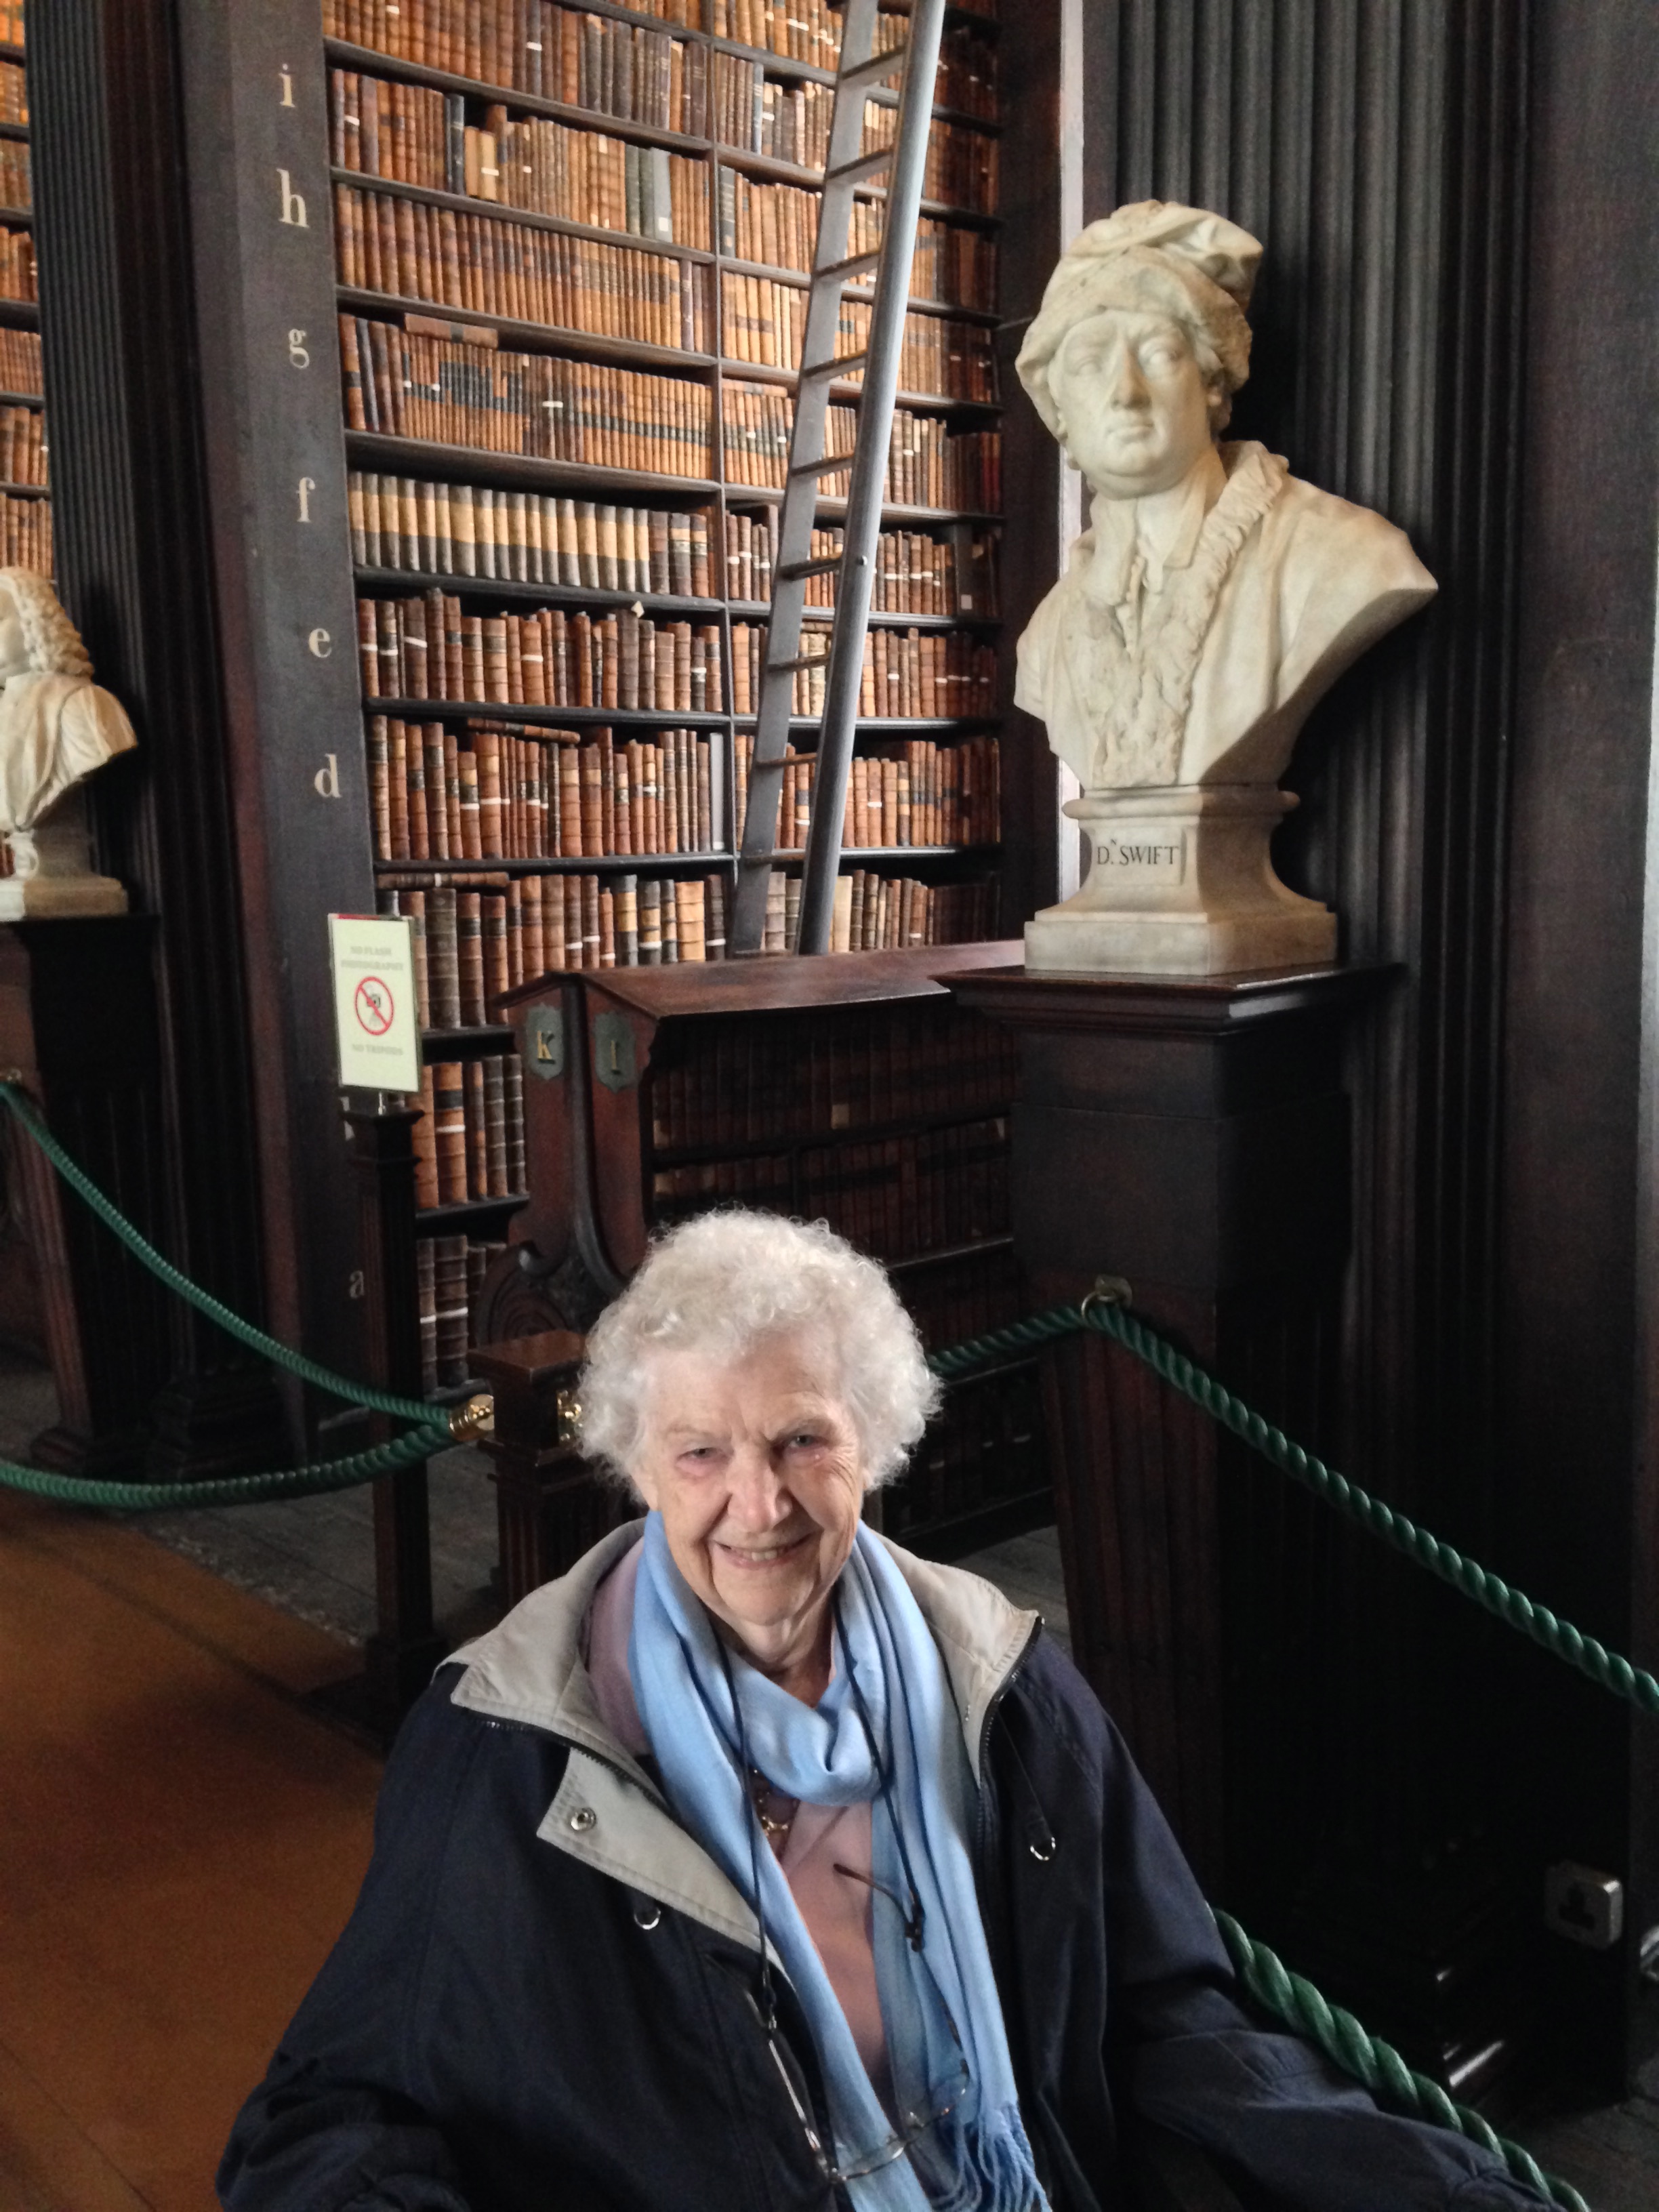 Roberta in the library at Trinity College. (Just being in a room like this makes you smarter!) Photo by Sara Burrus.